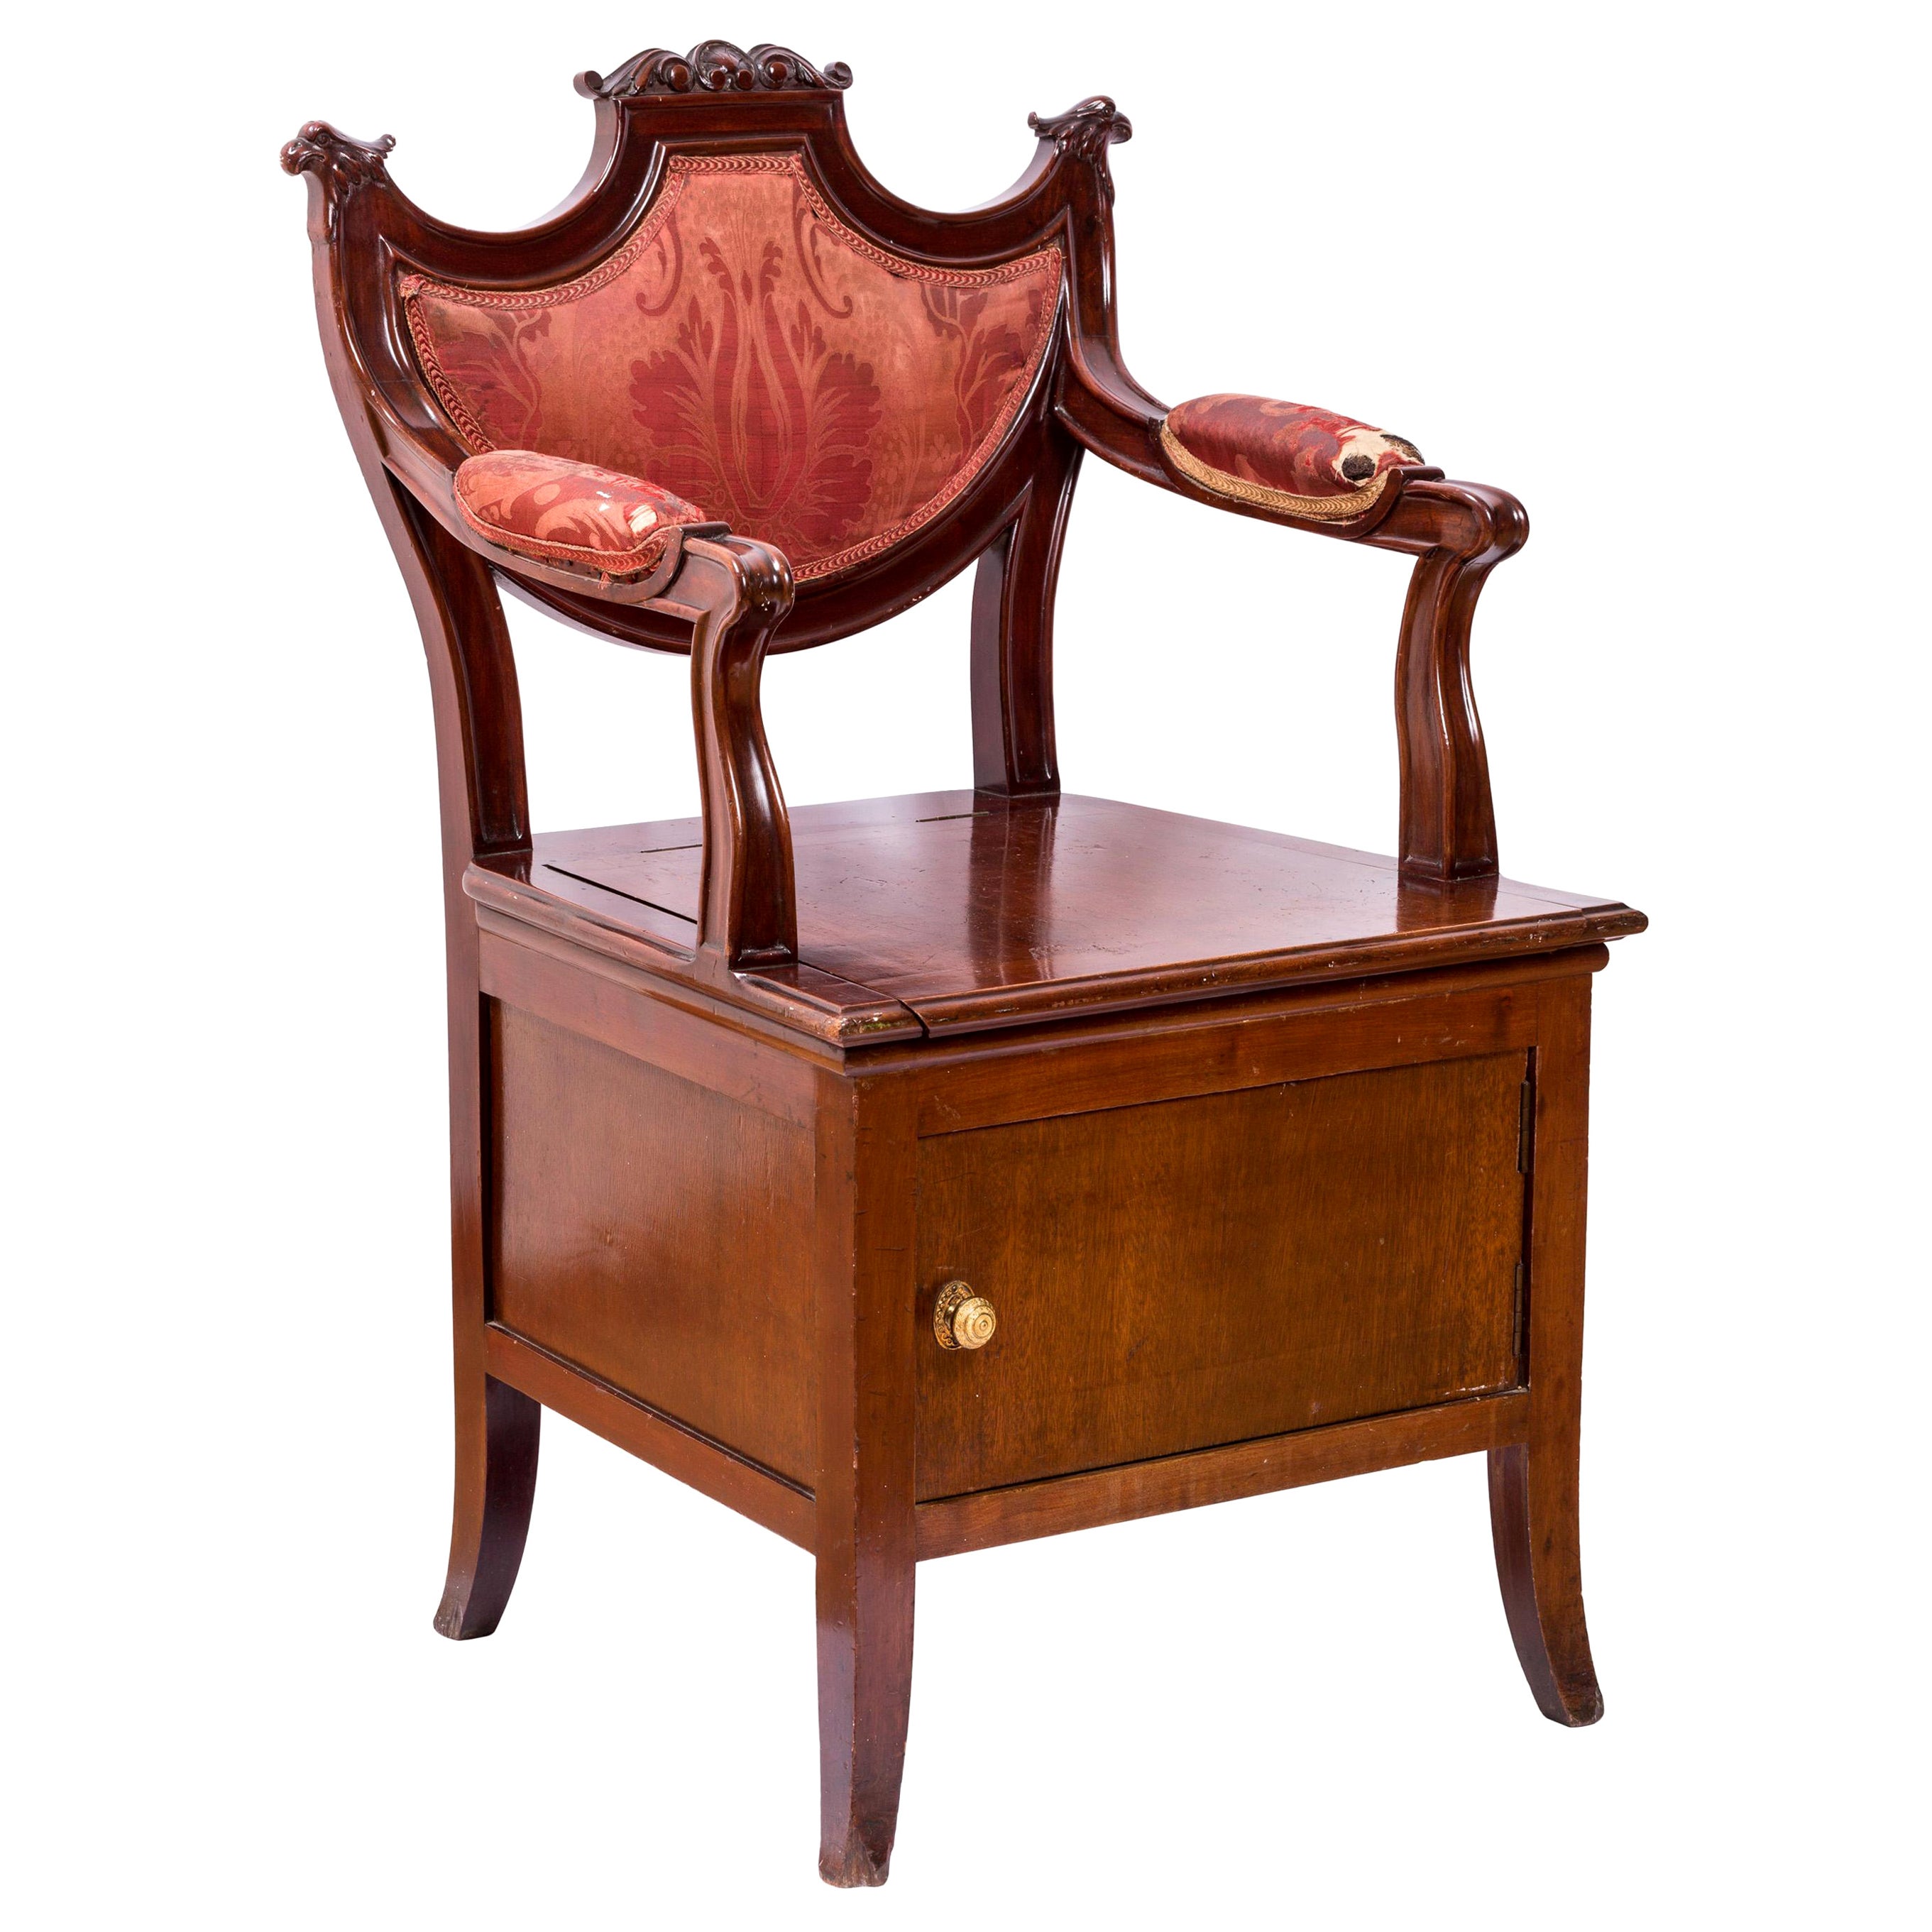 Antique French Napoleon III Style "Chaise Percée" Toilet / Throne, a Curiosity For Sale